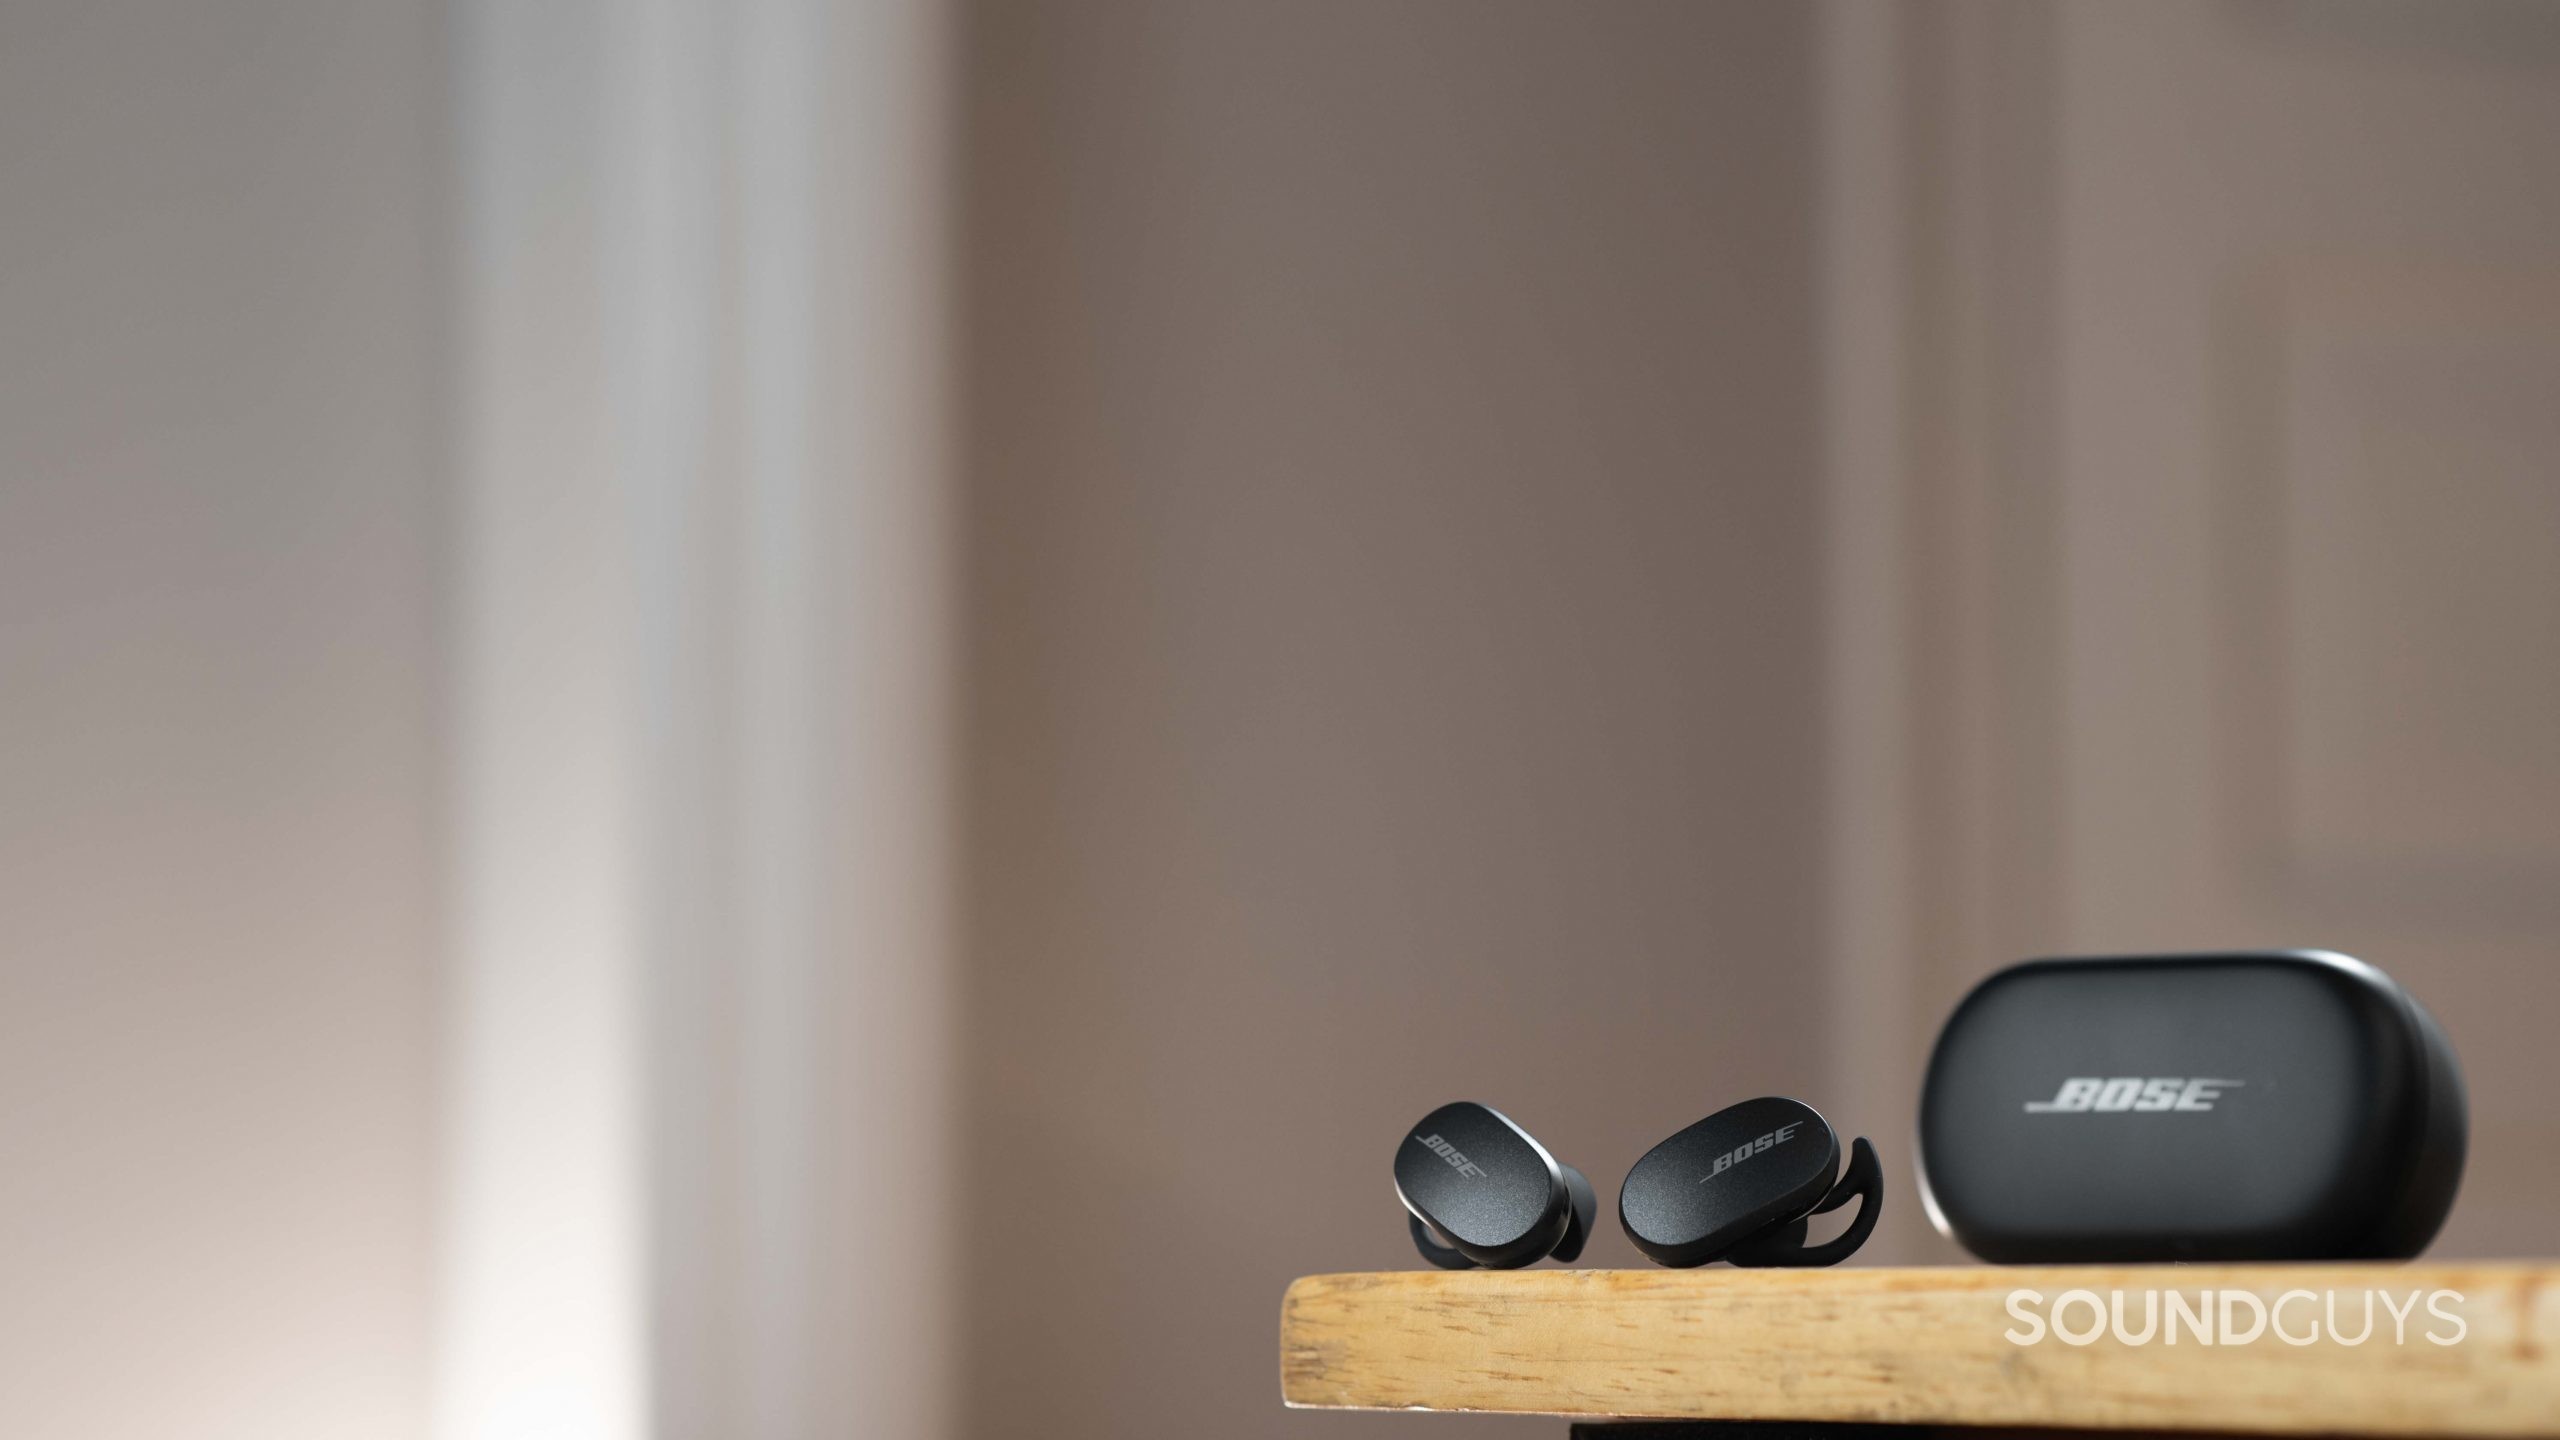 The Bose QuietComfort Earbuds noise canceling true wireless earbuds rest next to the closed charging case on a wood surface.